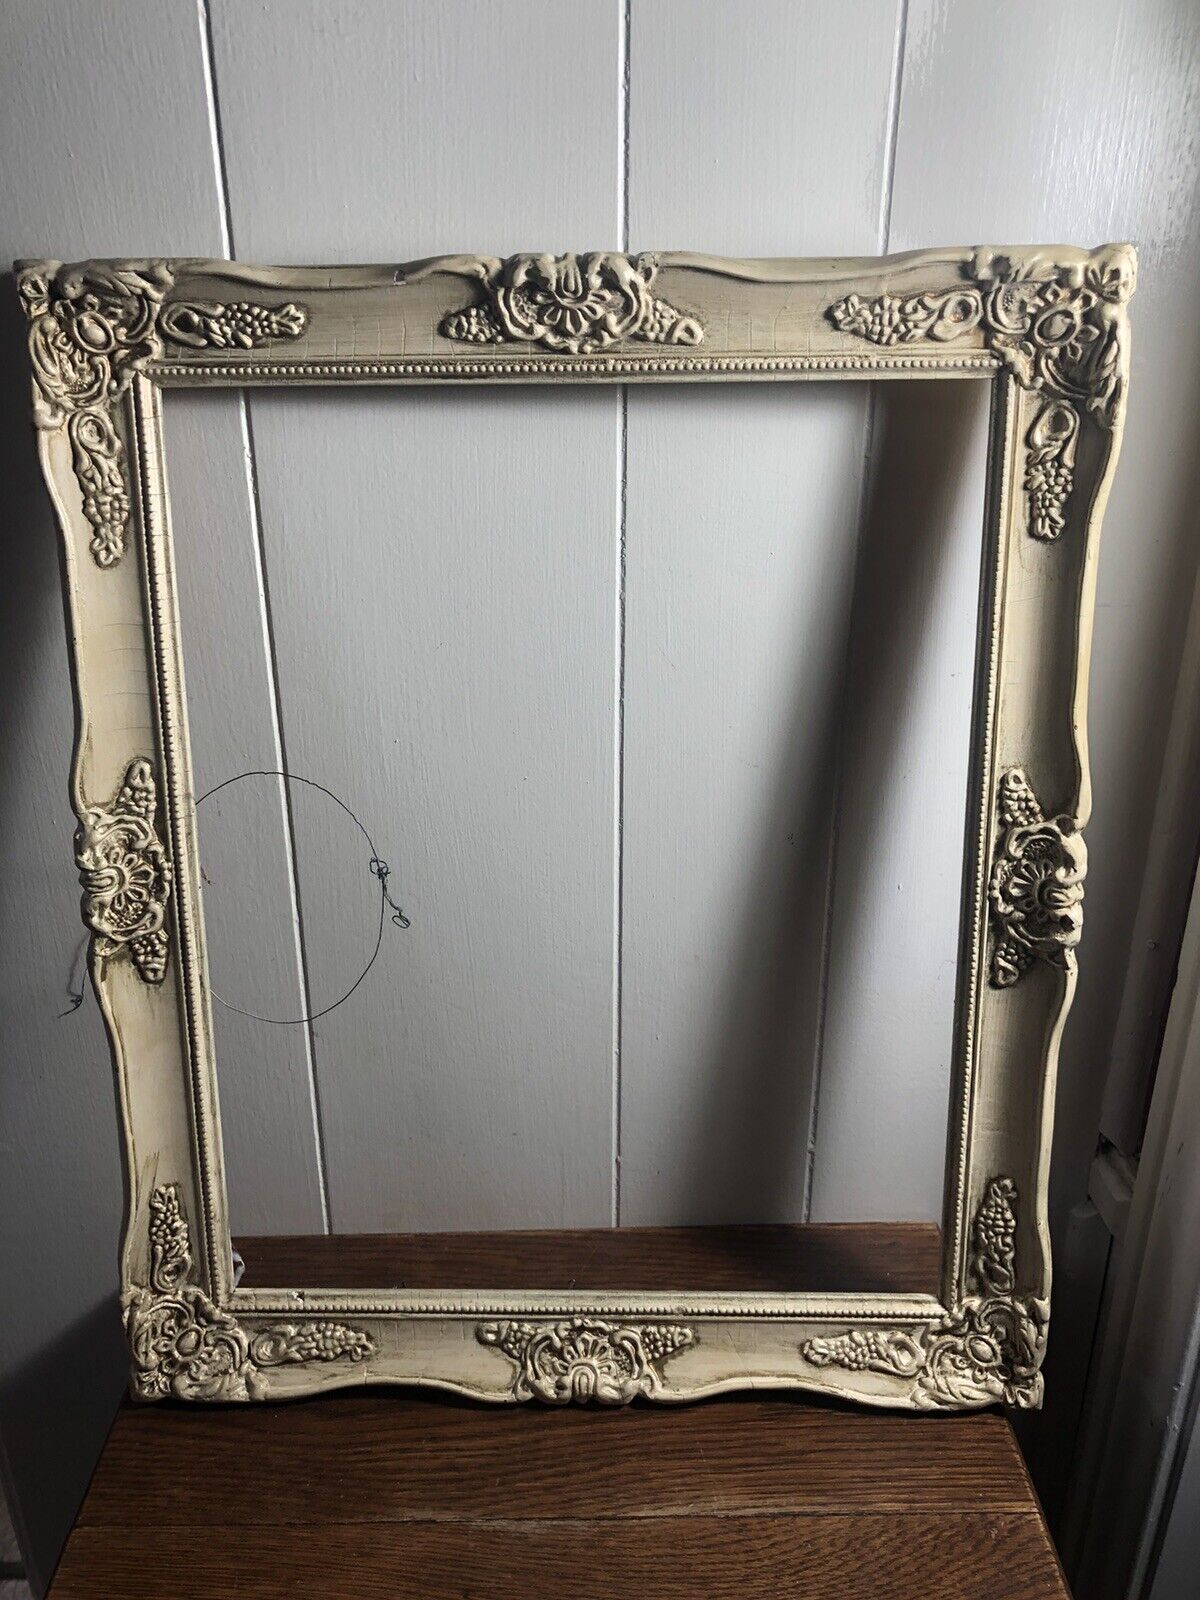 Vintage 19 x 16 Shabby Chic Ornate Cream Picture Frame Holds 13 x 16